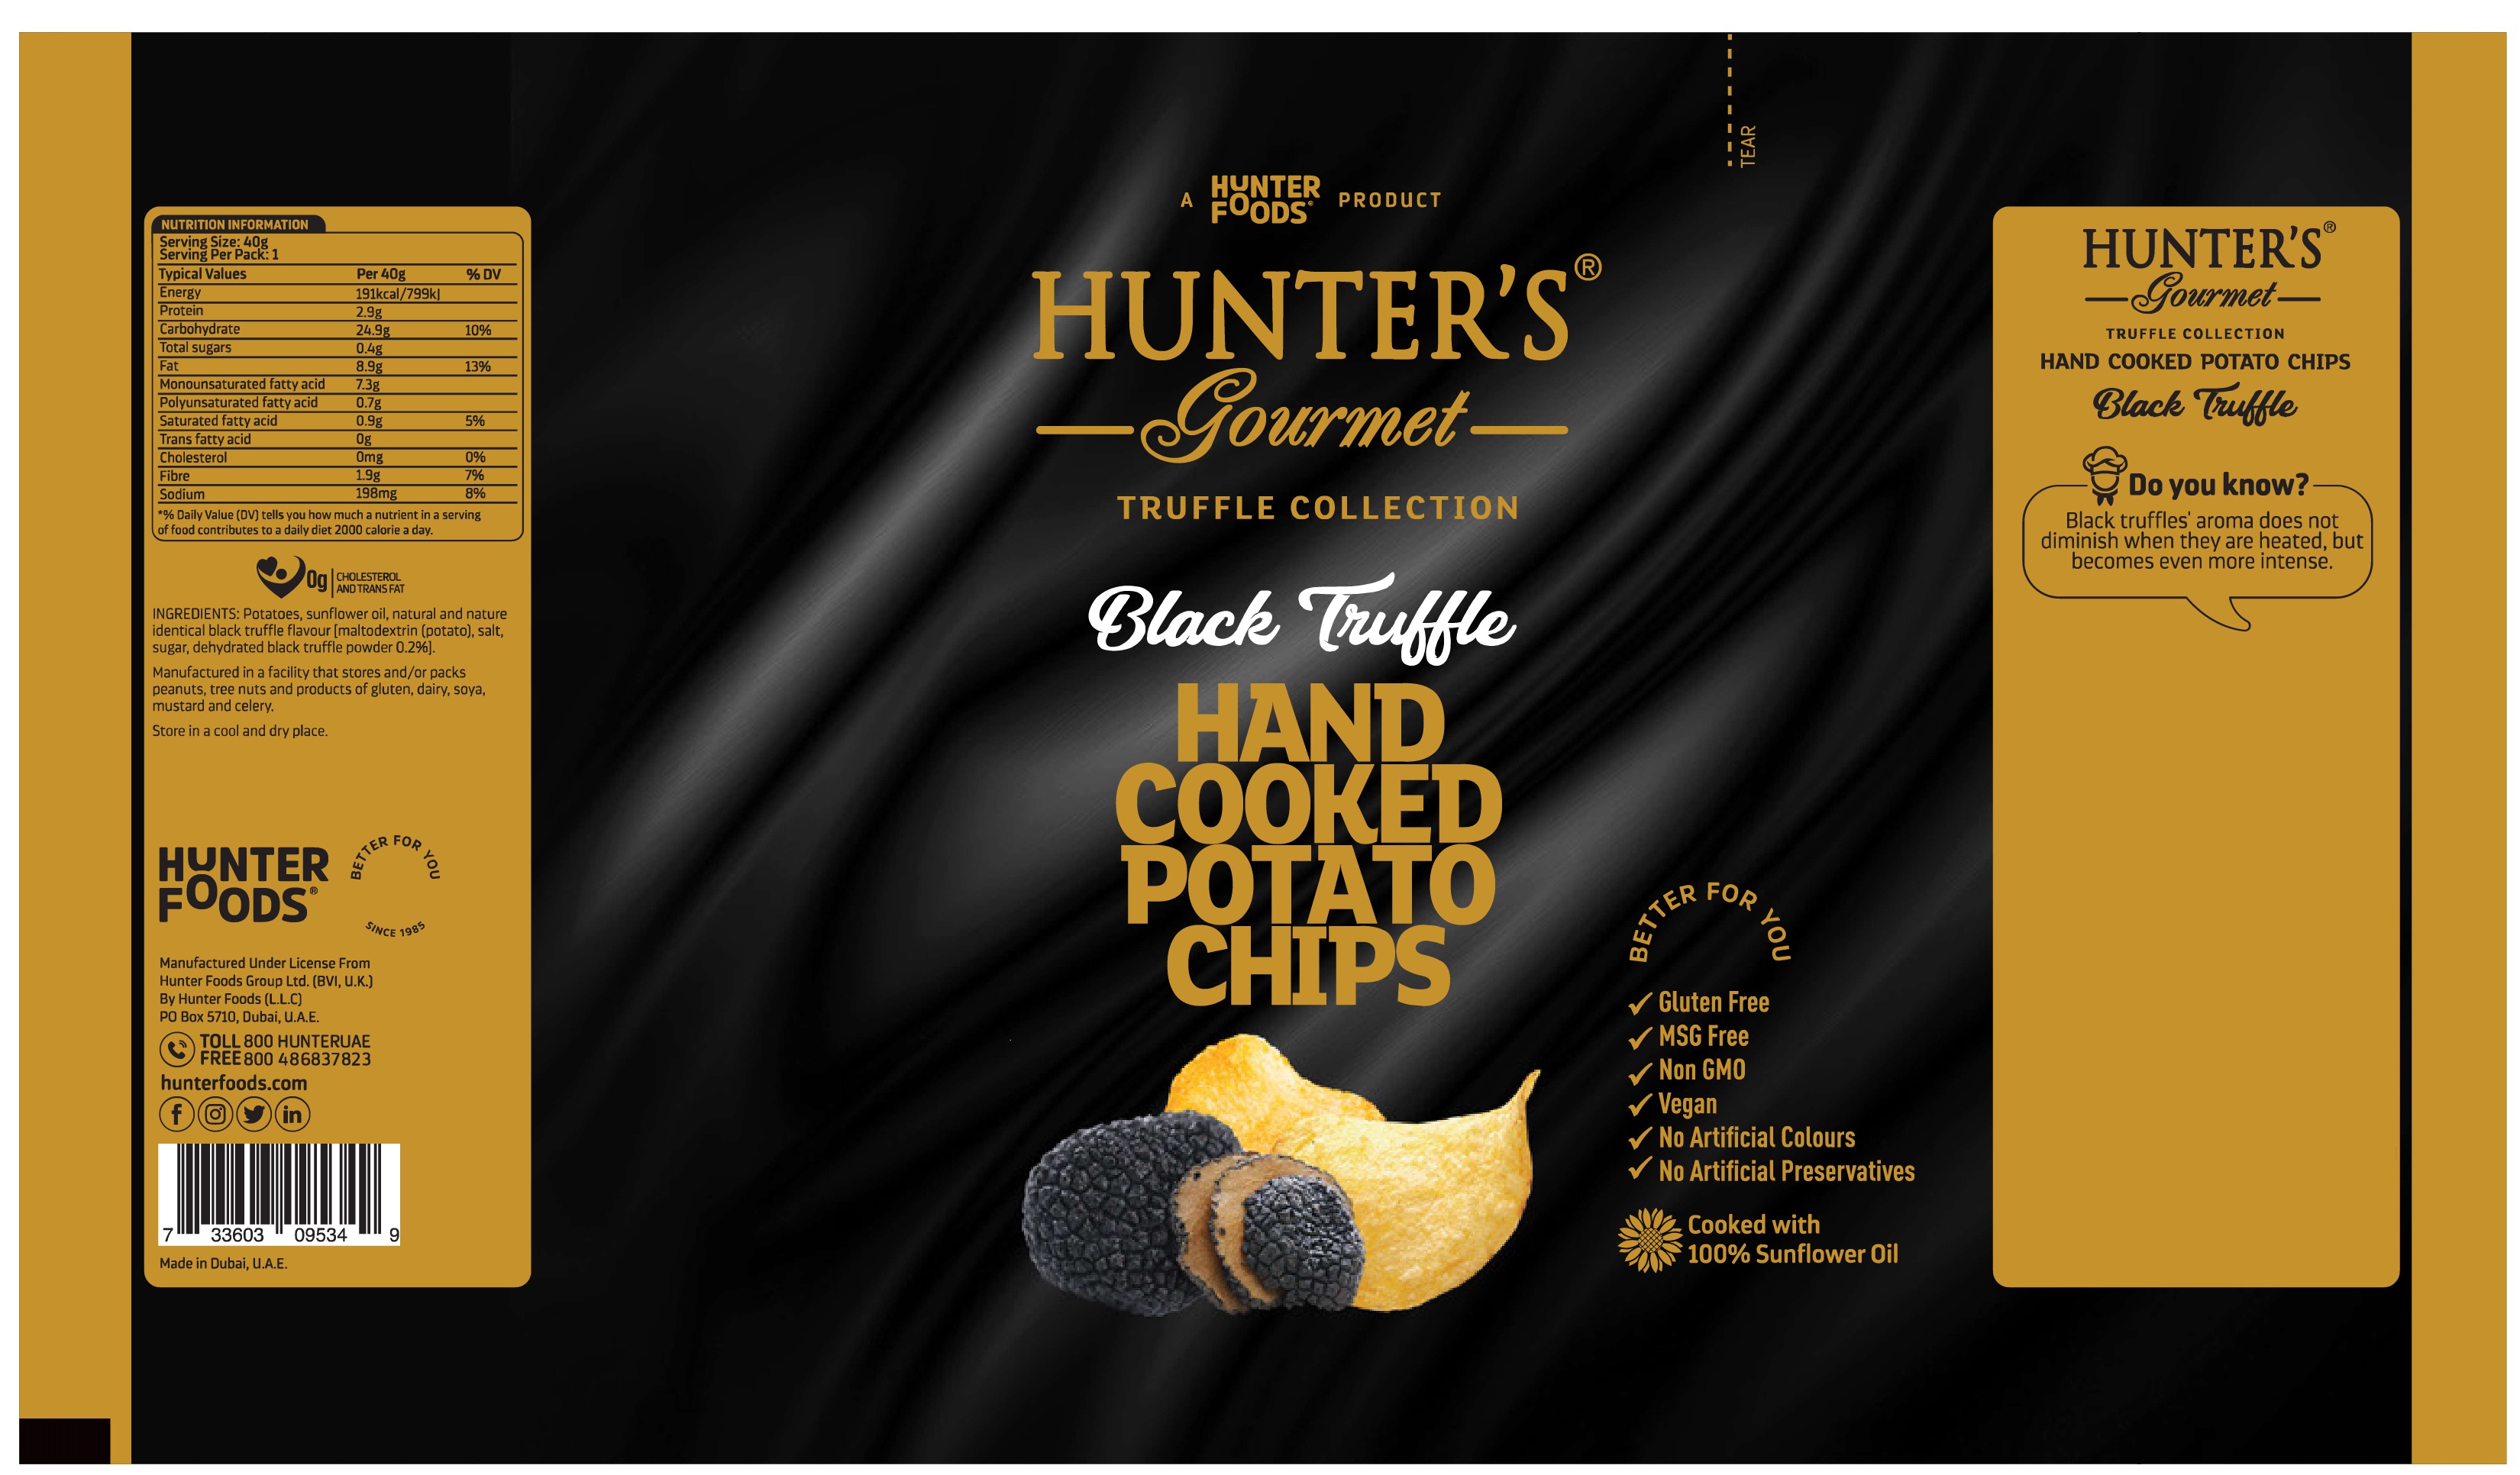 Hunter's Gourmet Hand Cooked Potato Chips Black Truffle 24 units per case 40 g Product Label